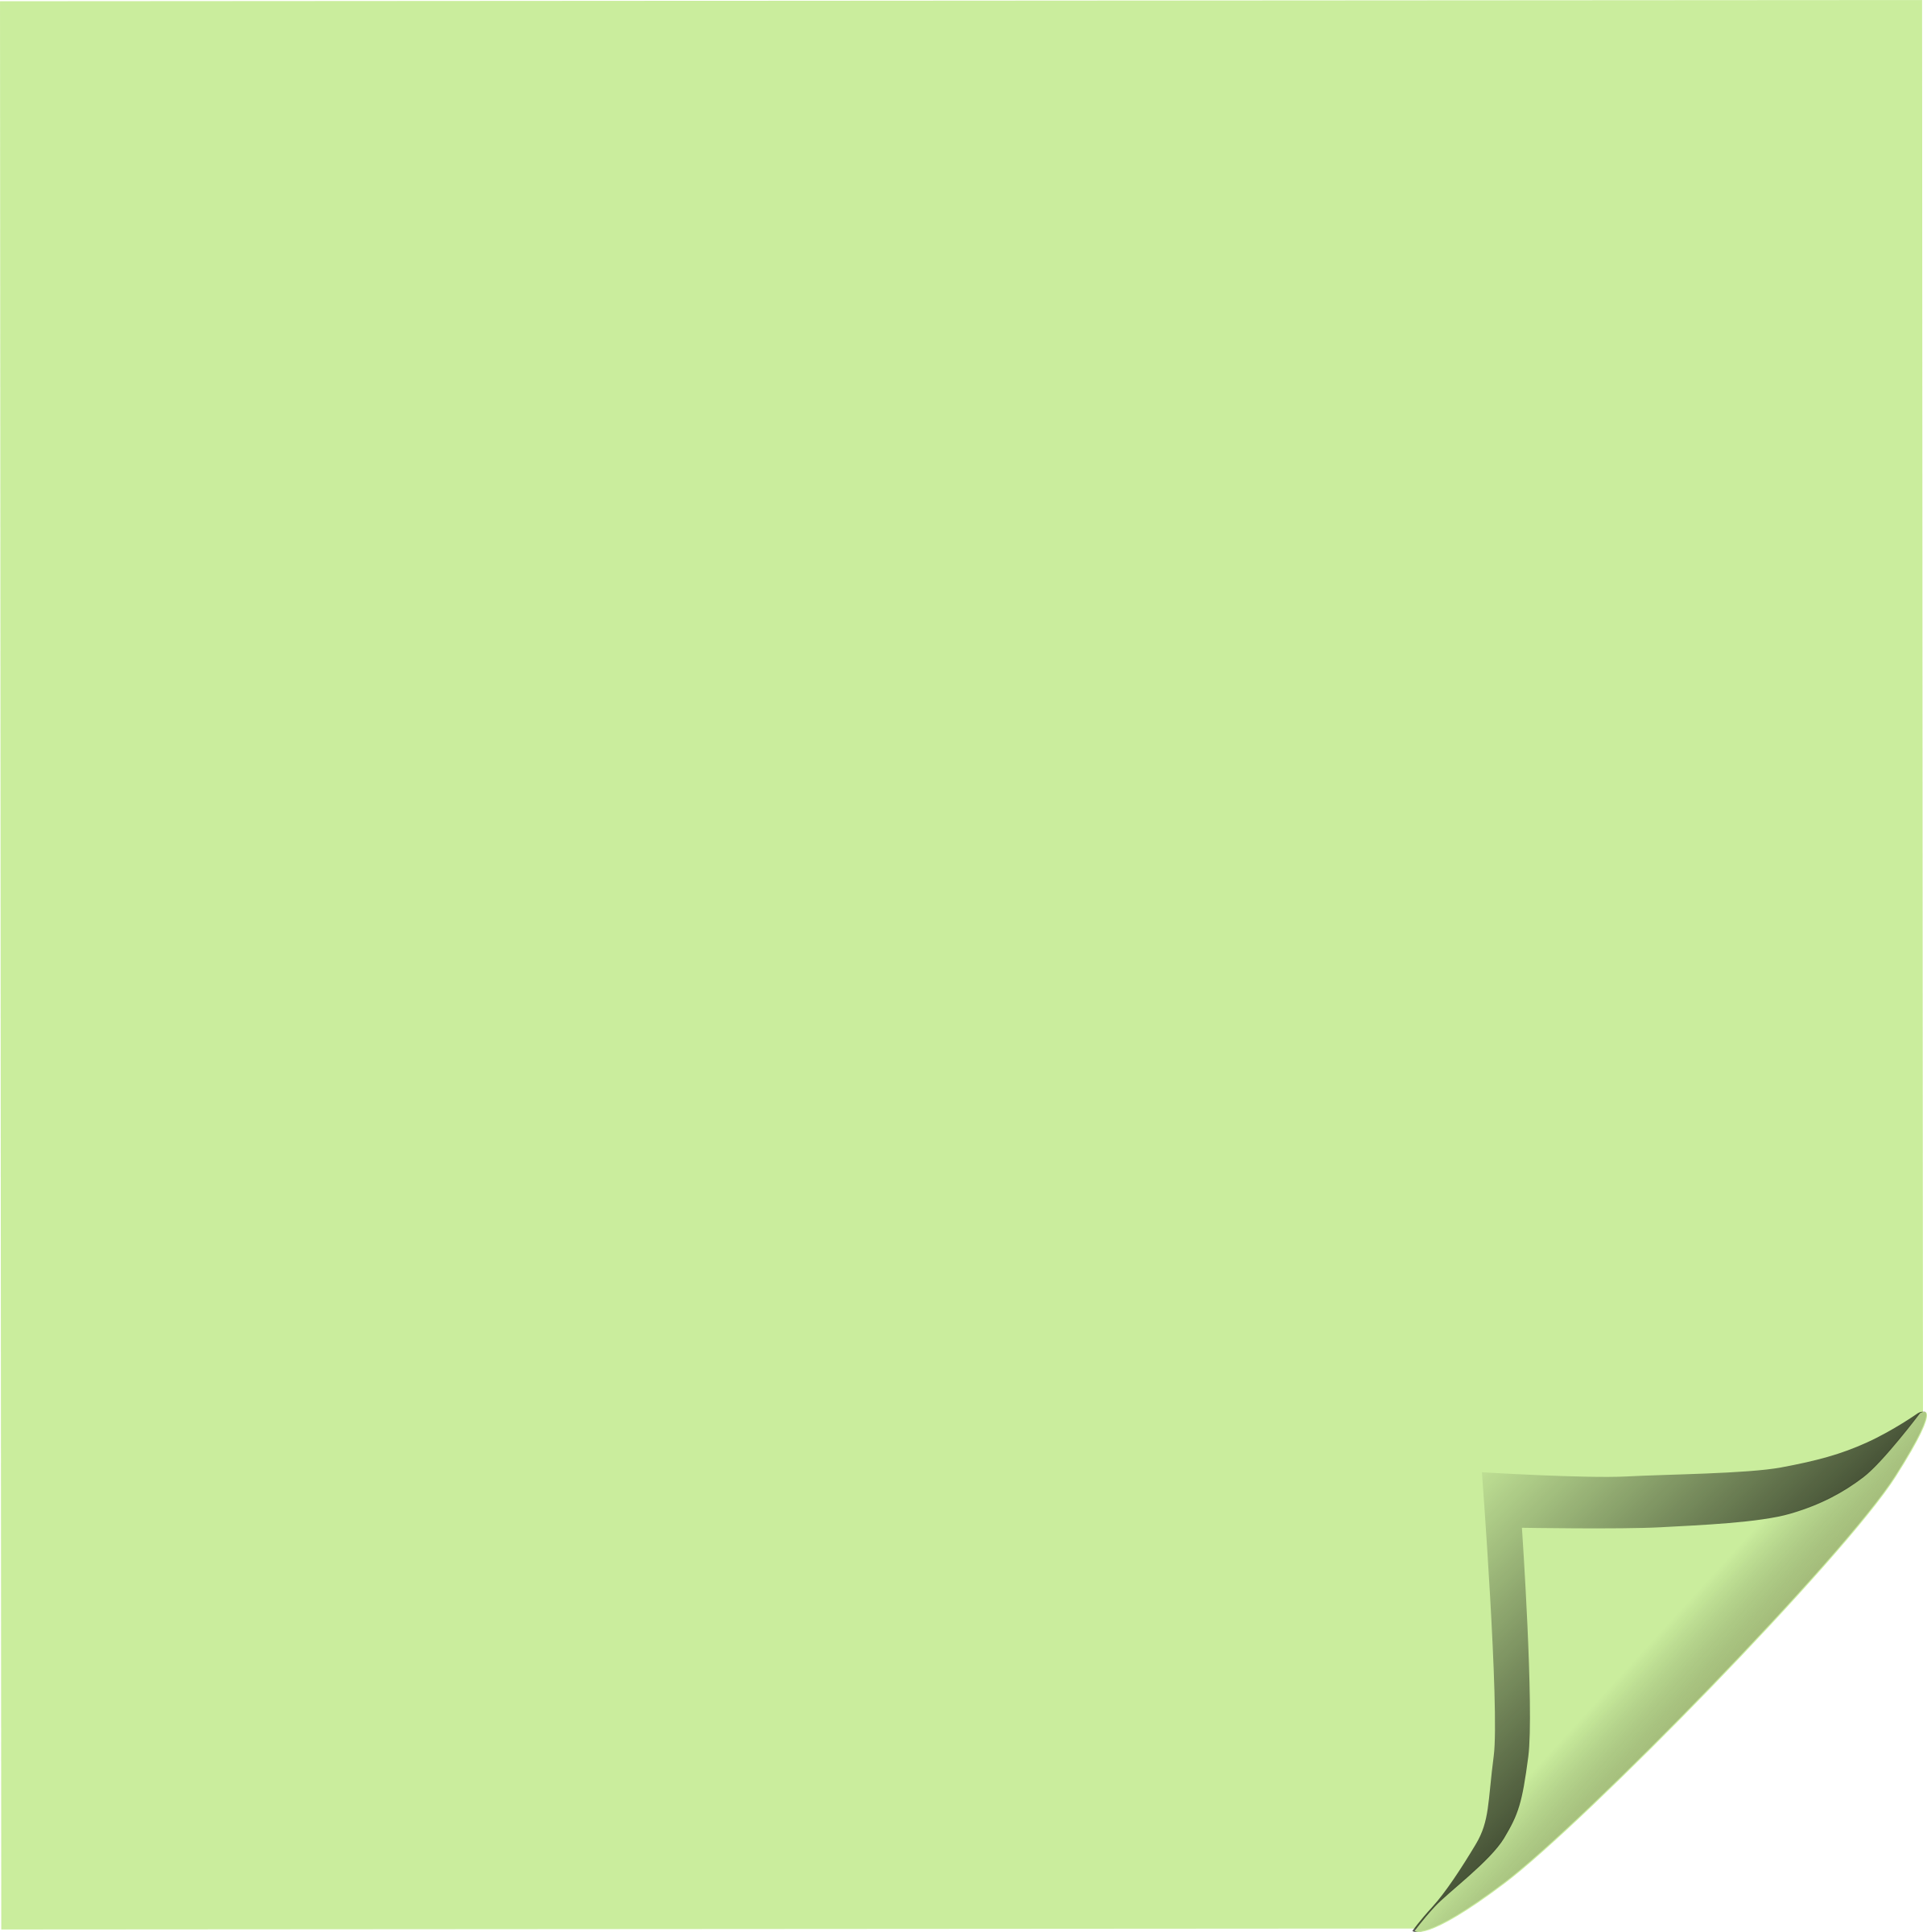 Green Sticky Notes PNG Image